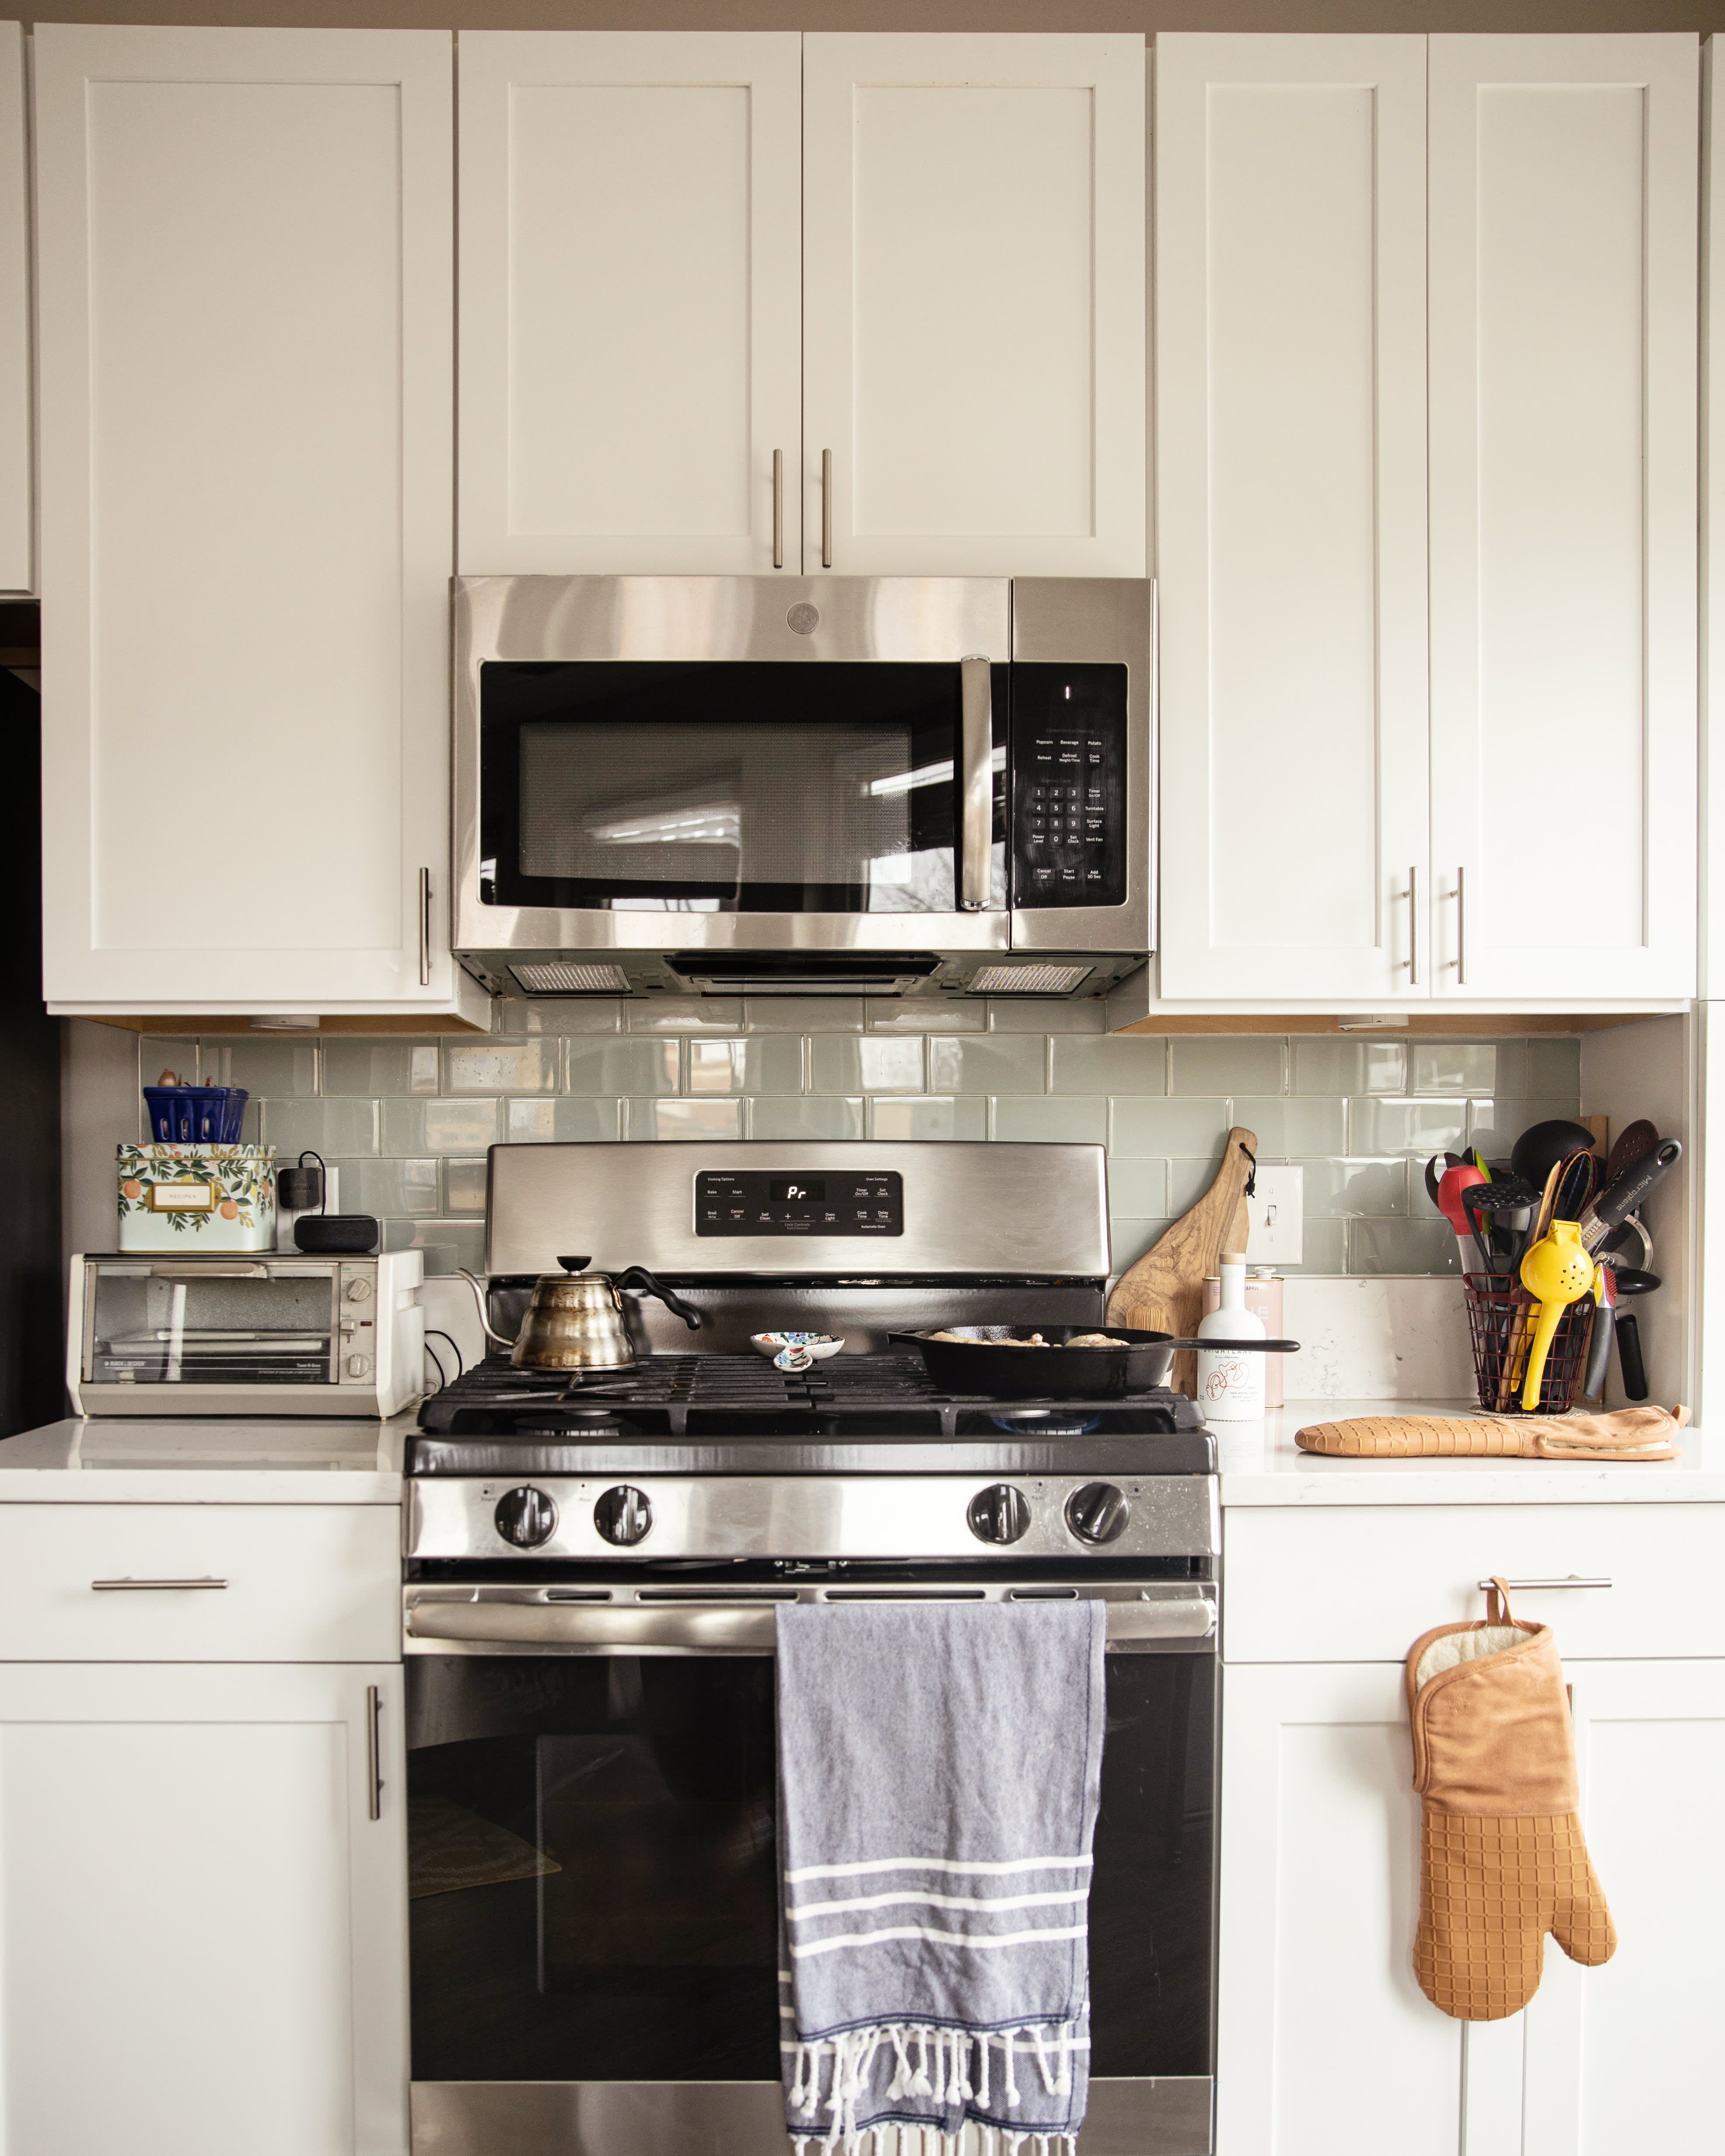 8 Space-Saving Appliances For Small Kitchens